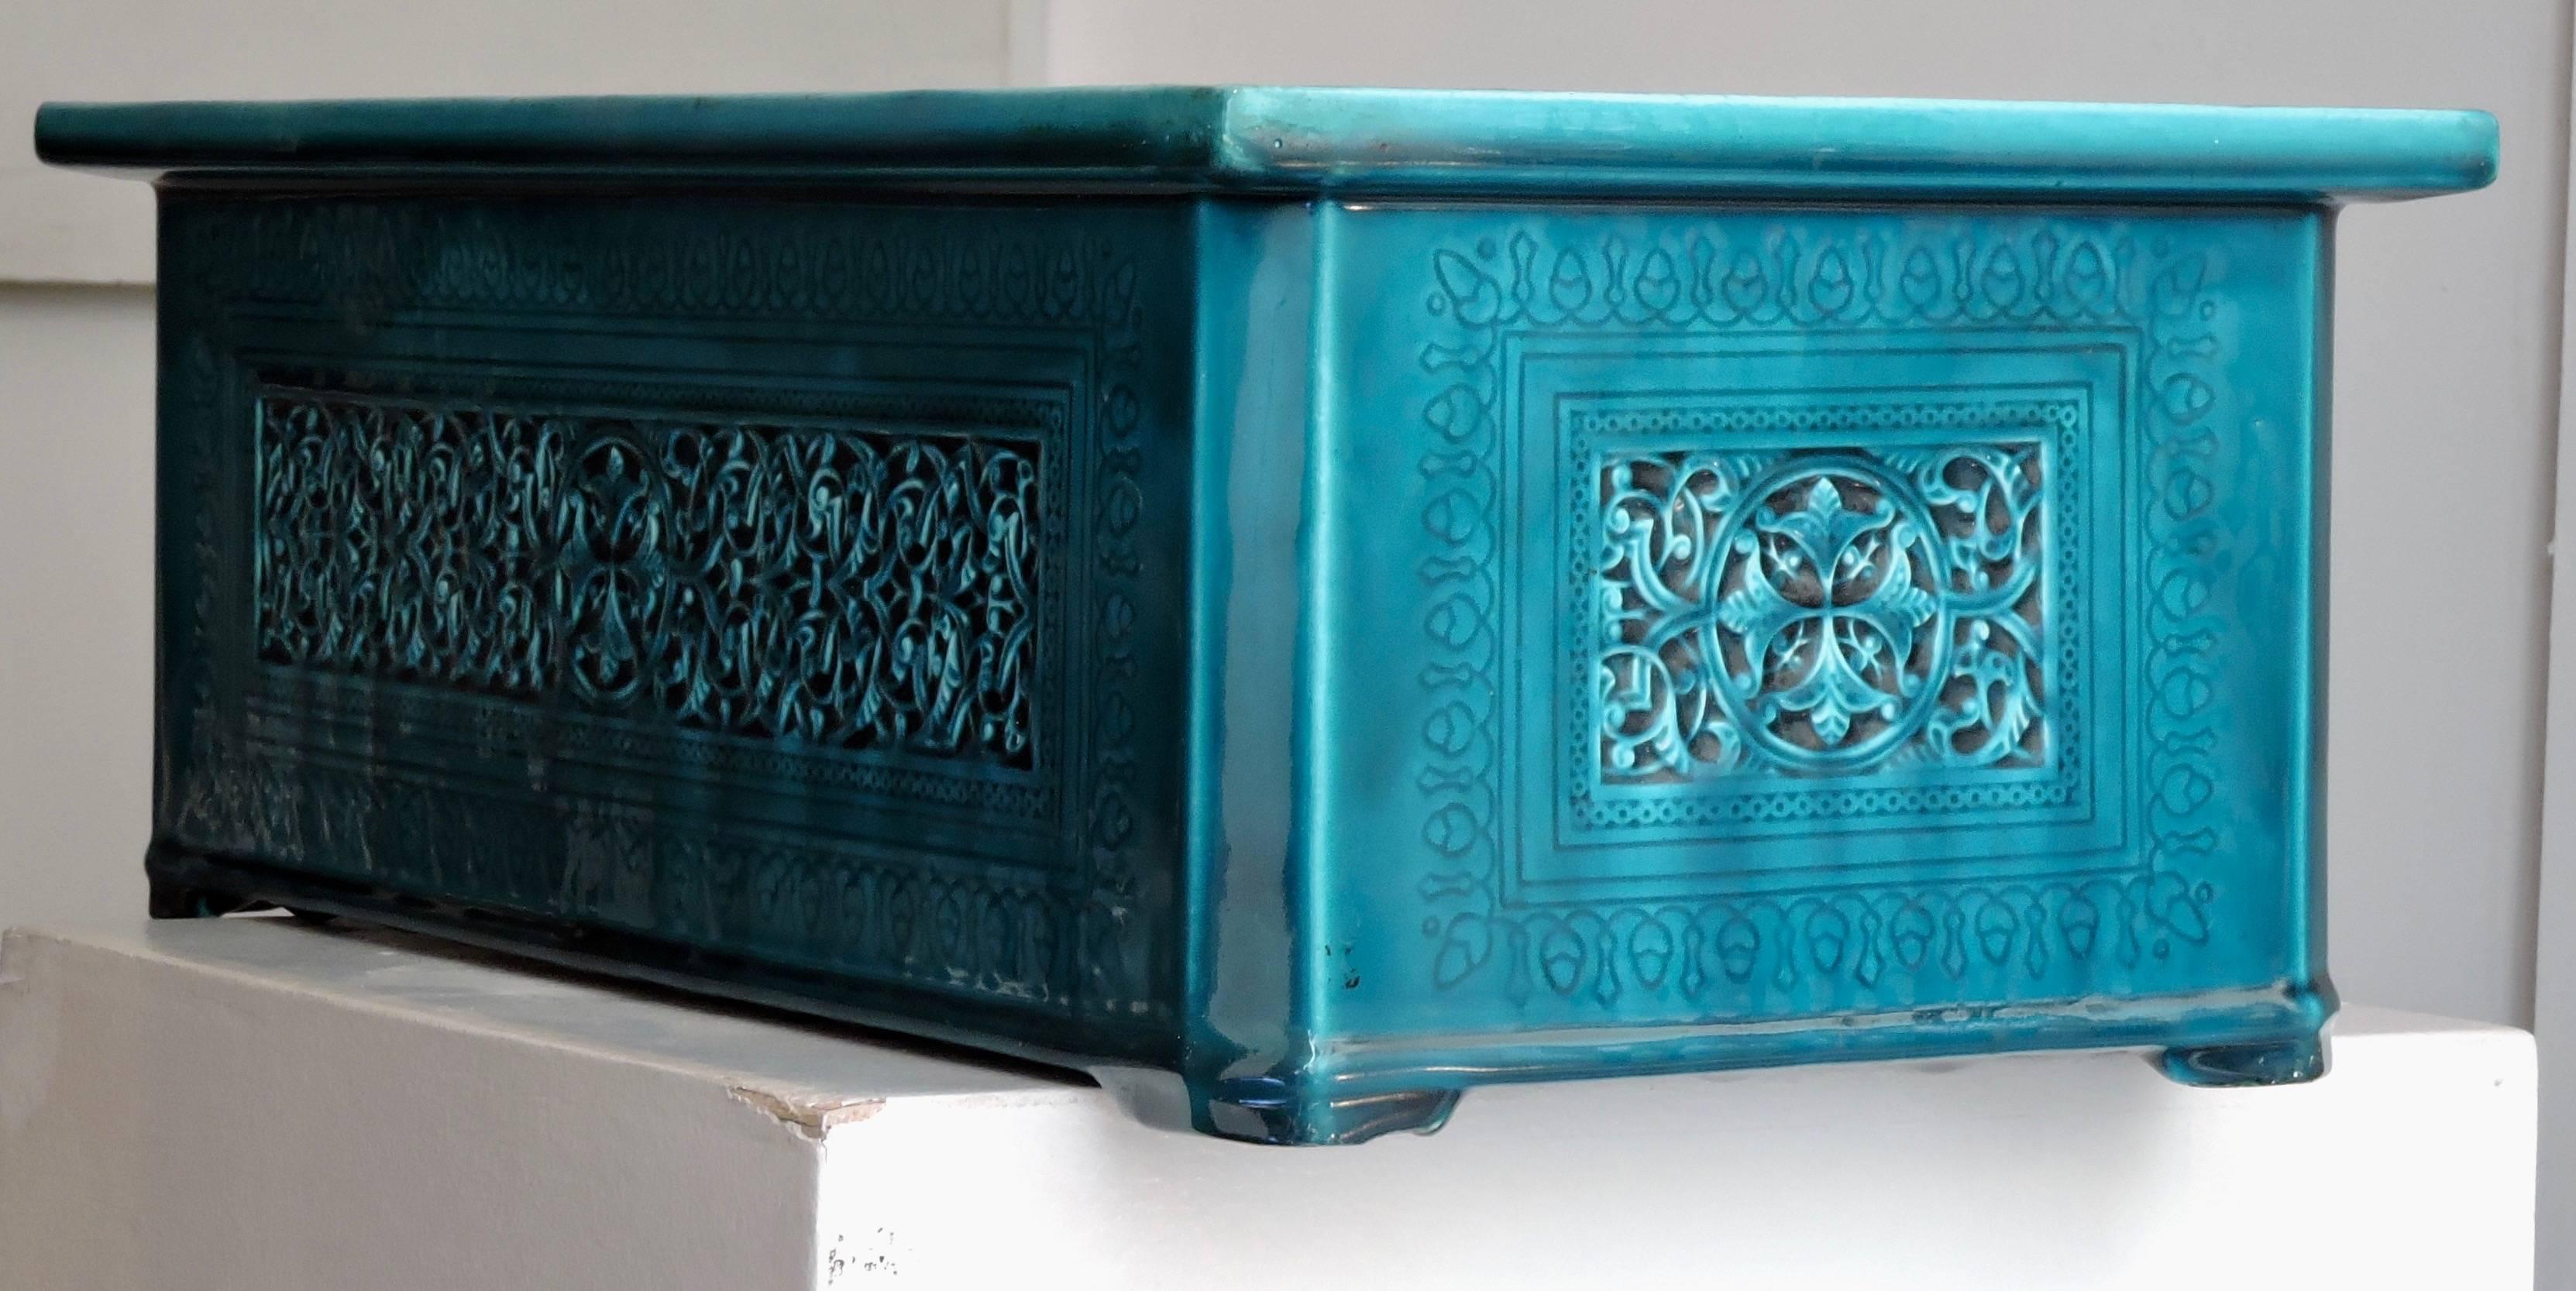 A Rectangular Théodore Deck blue-Persian faience cachepot in the Islamic style, modelled in low relief and incised with interlacing and rosette pattern.
With original zinc planter receiver
Signed TH.DECK in Hollow.